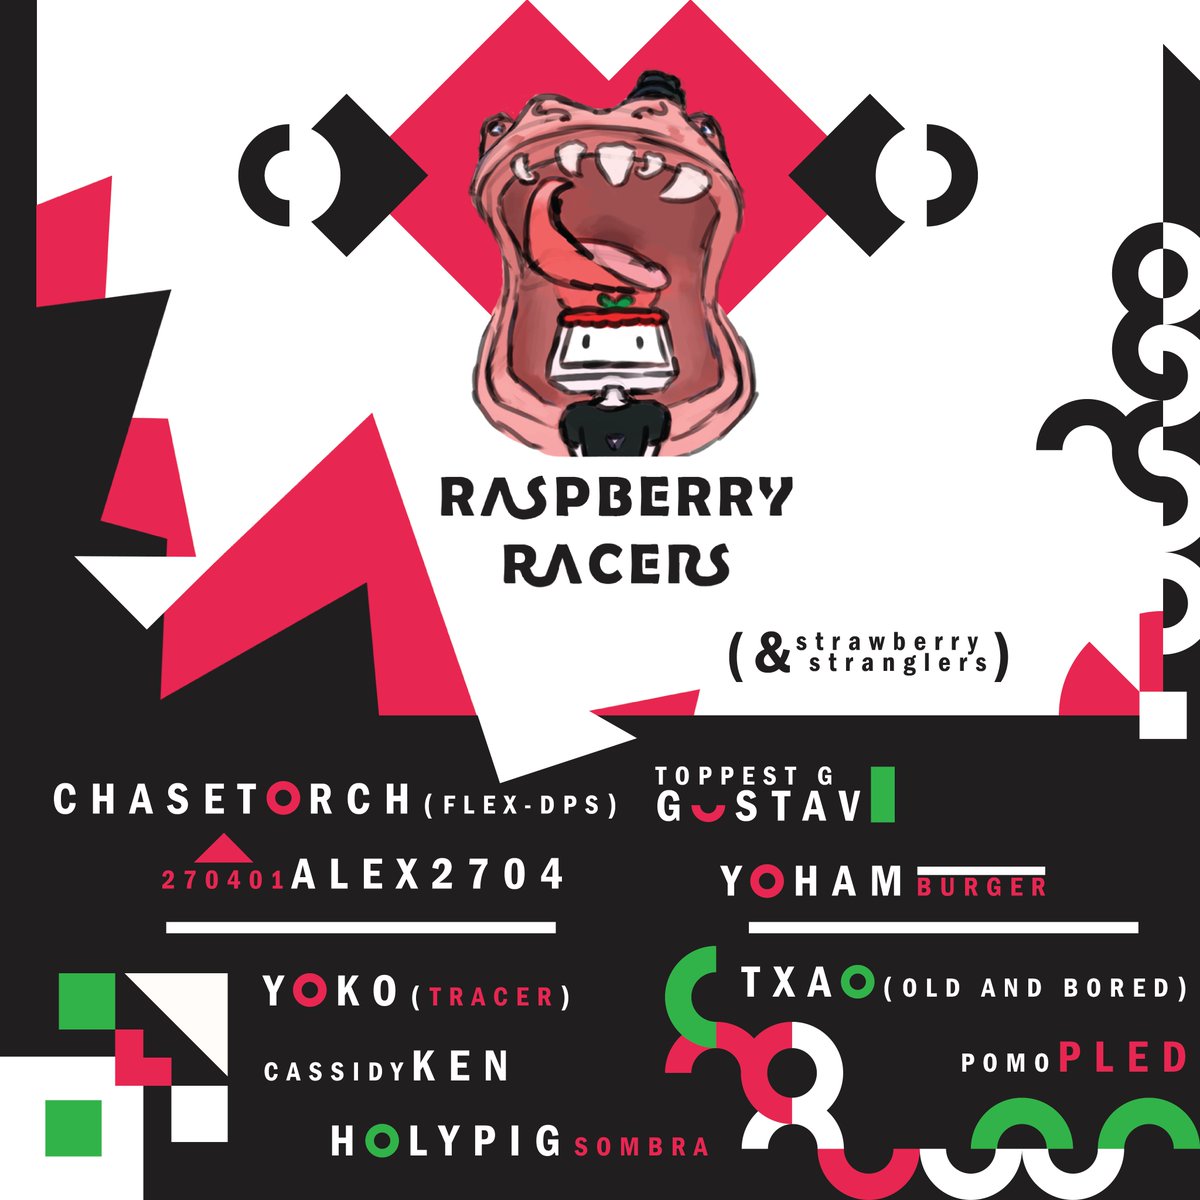 The Racers are racing once again. First race tomorrow. 🫳@Chasetorchh 😎@Alexander270401 😺@Yoko_OW 🌹@sxnken 🦑🎮@TheHolyPig_ow 🐍@OWGustav 🍔@yoham_ow 🕵️@Txao_ 🐀@pledplers #SWTRR